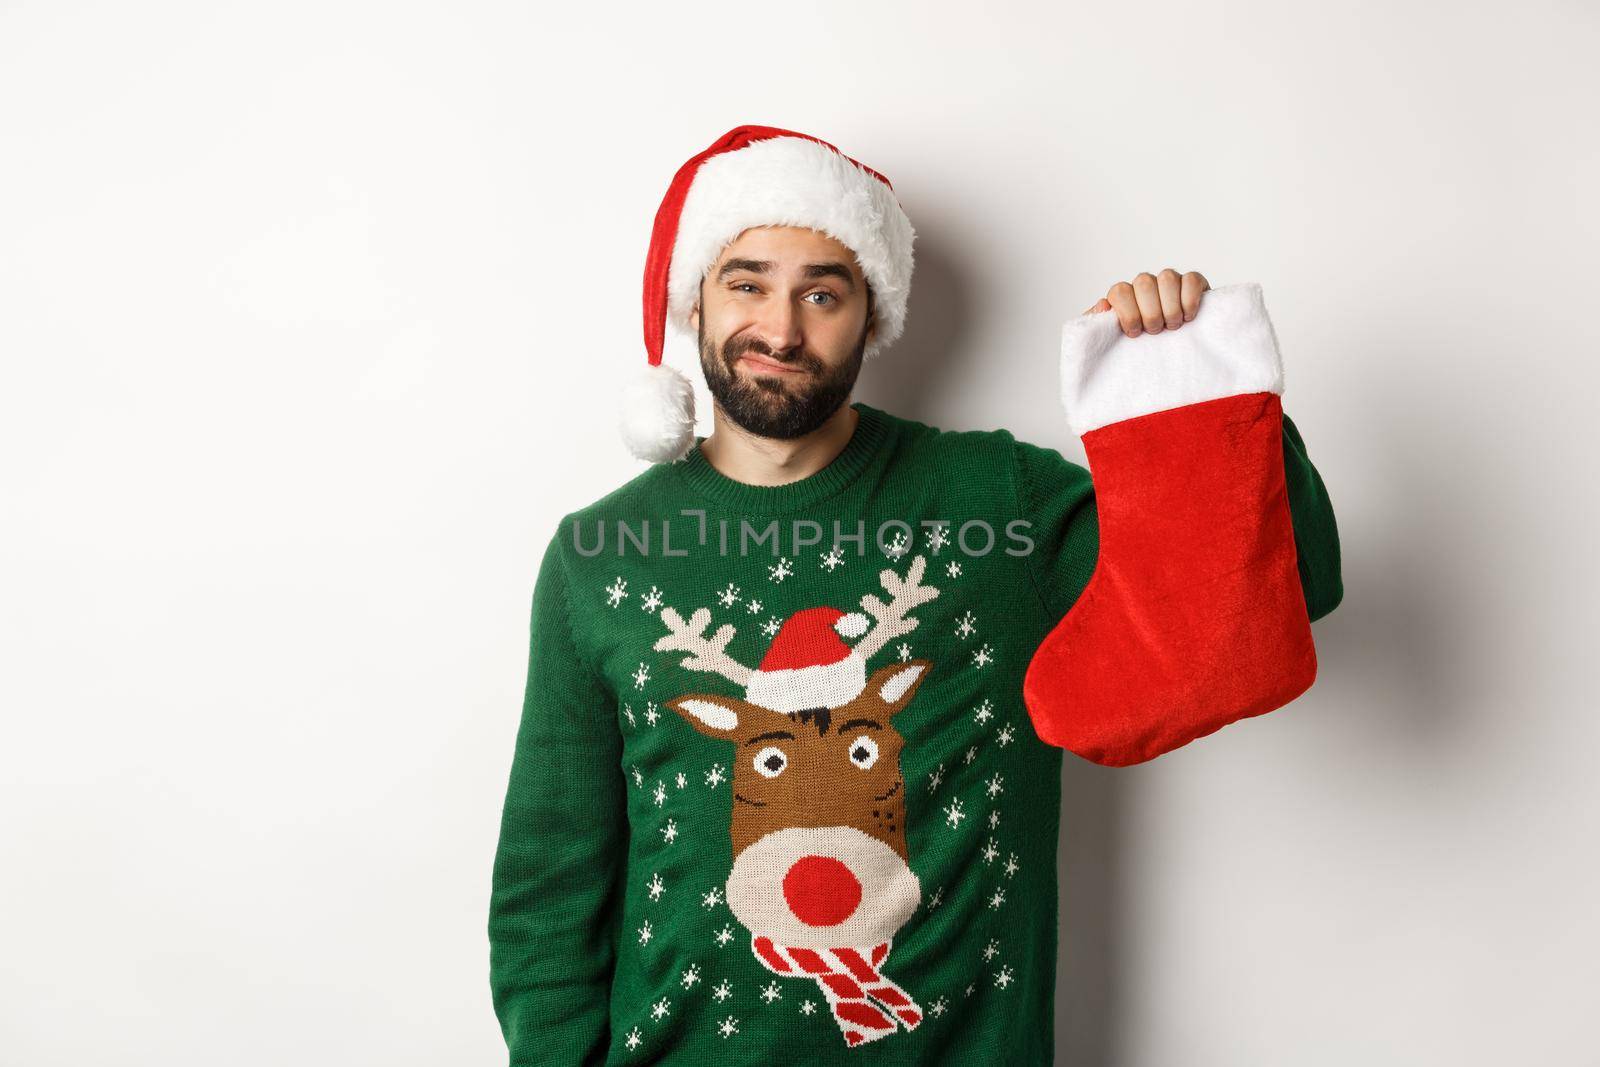 Xmas and winter holidays concept. Displeased guy disappointed in gift in Christmas sock, standing upset in Santa hat against white background.